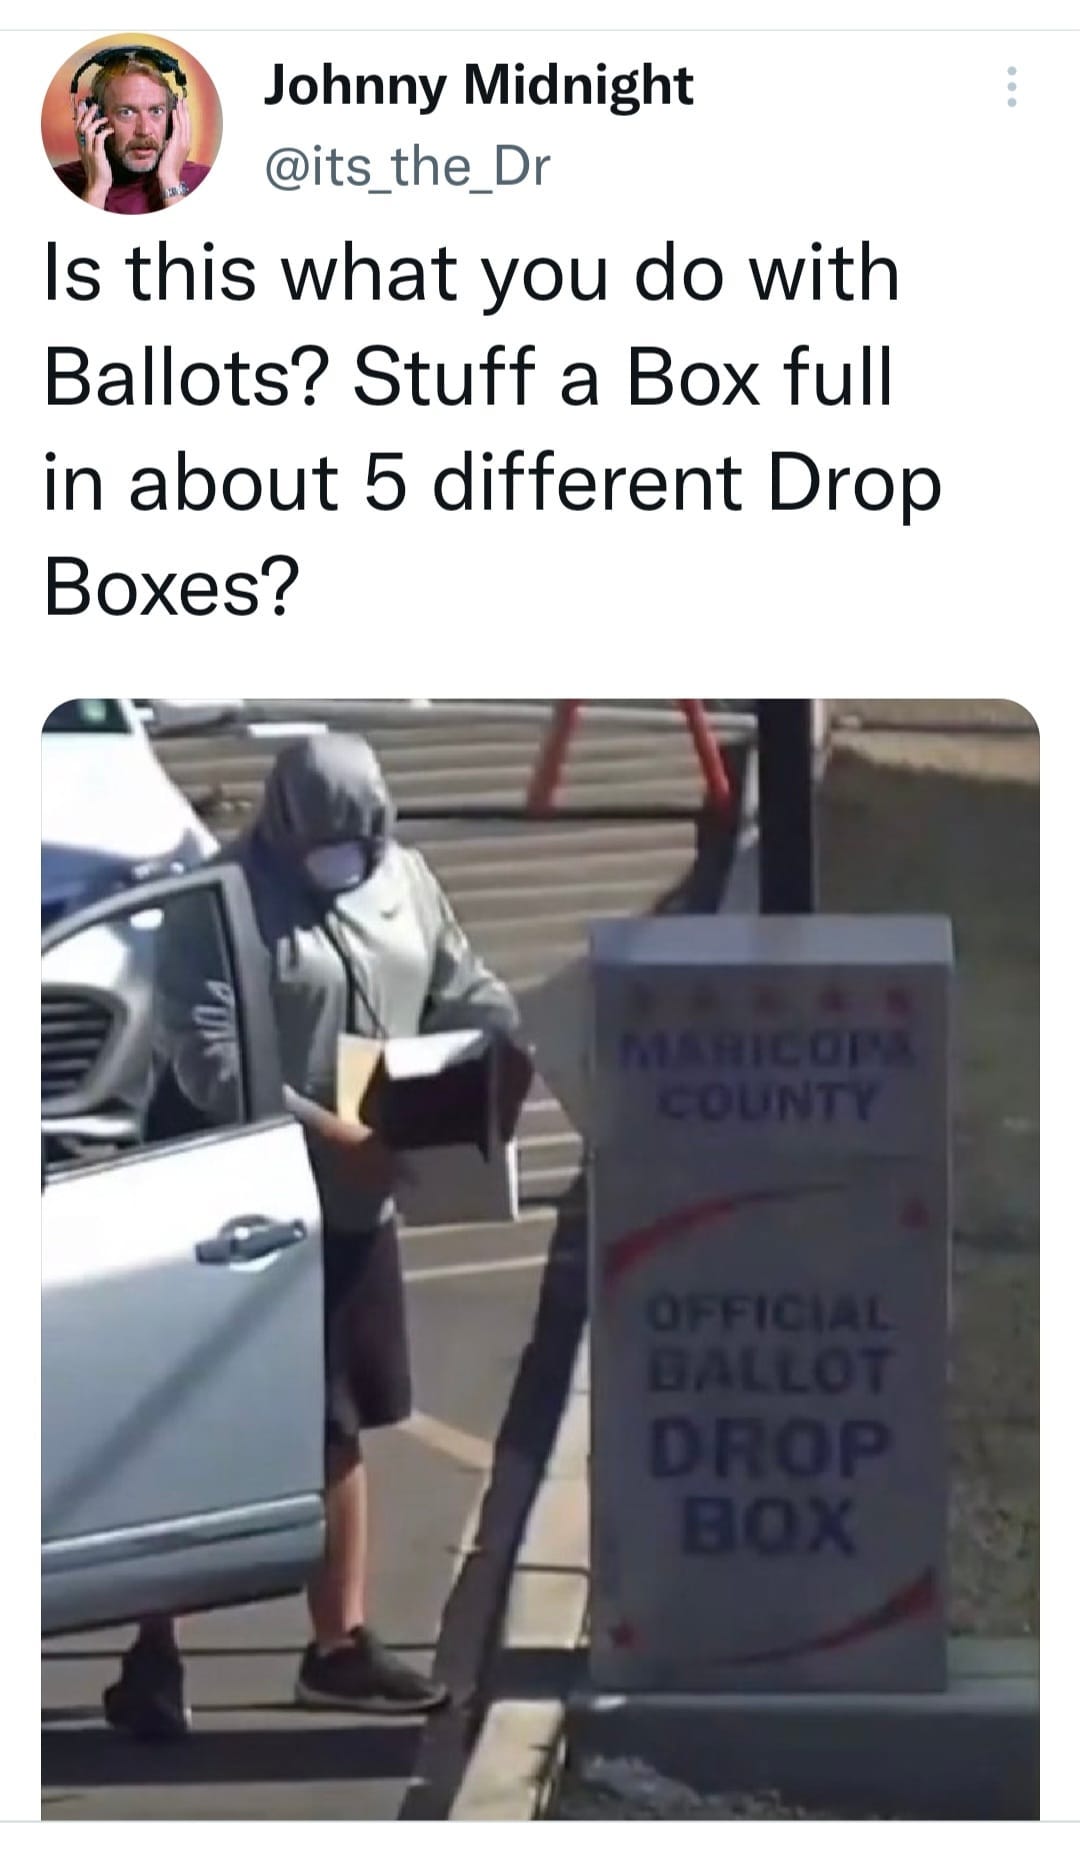 May be an image of 2 people and text that says 'Johnny Midnight @its_the_D Is this what you do with Ballots? Stuff a Box full in about 5 different Drop Boxes?'